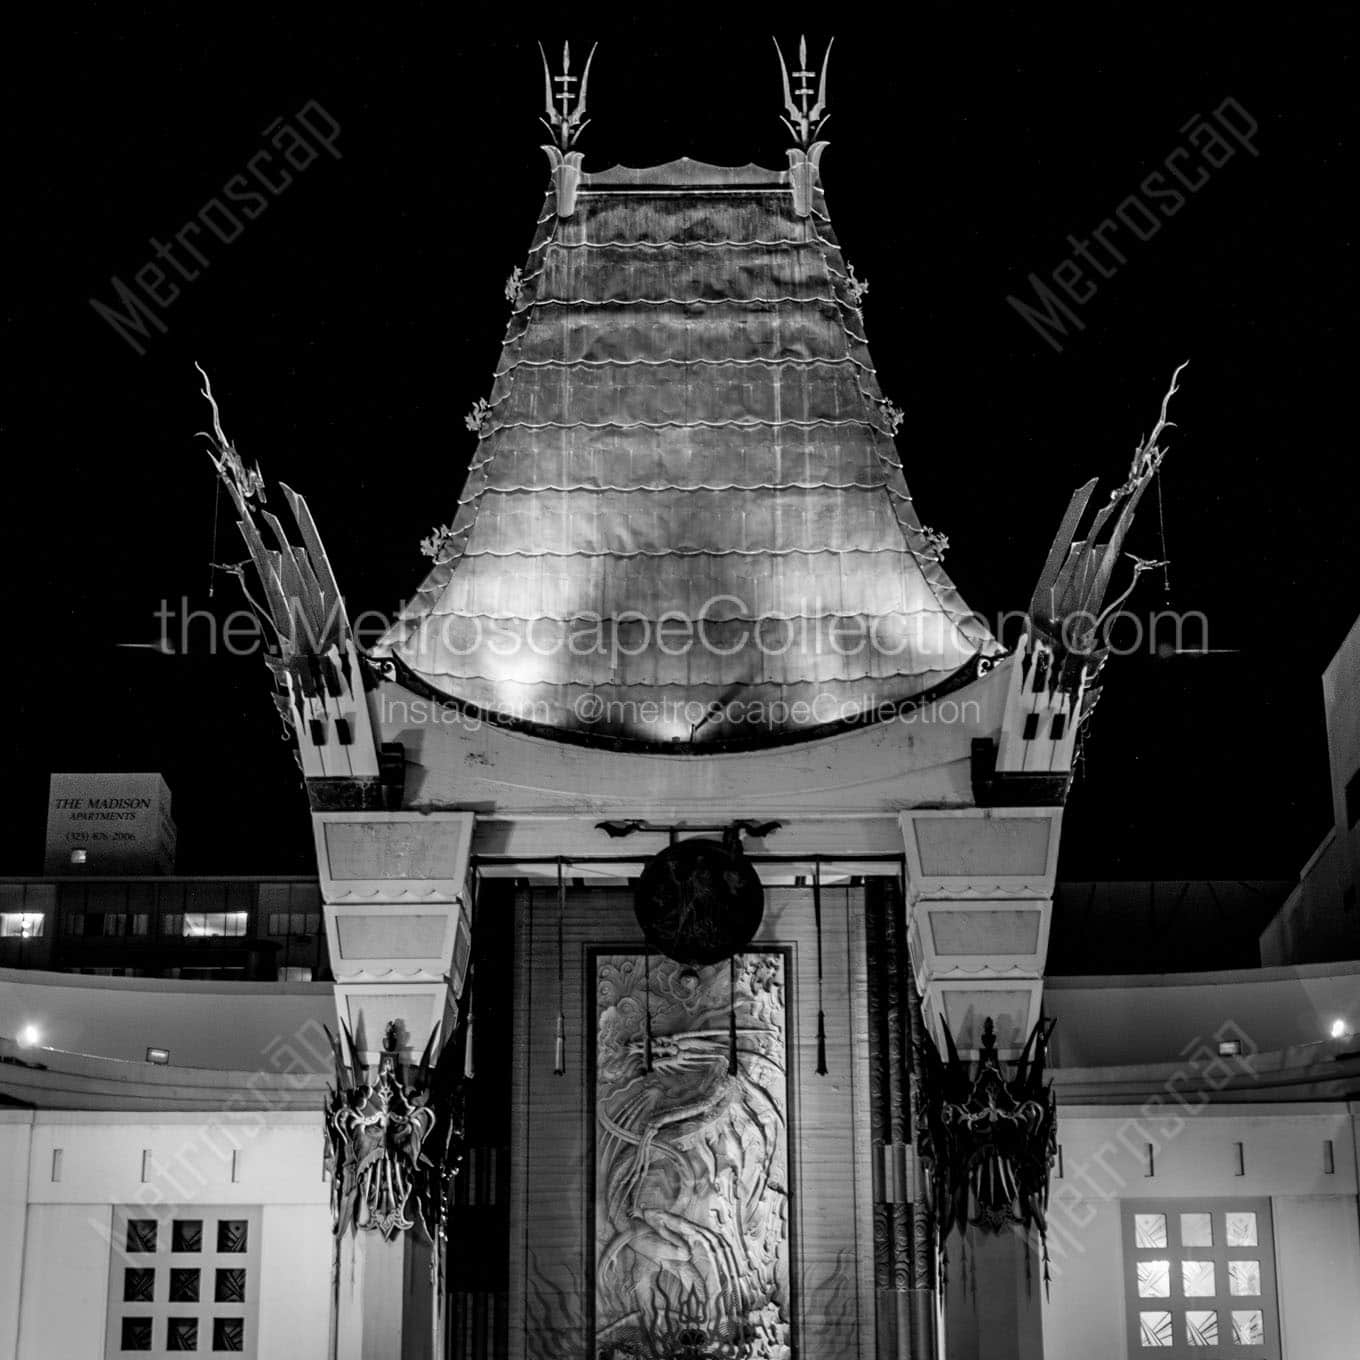 chinese theater at night Black & White Office Art